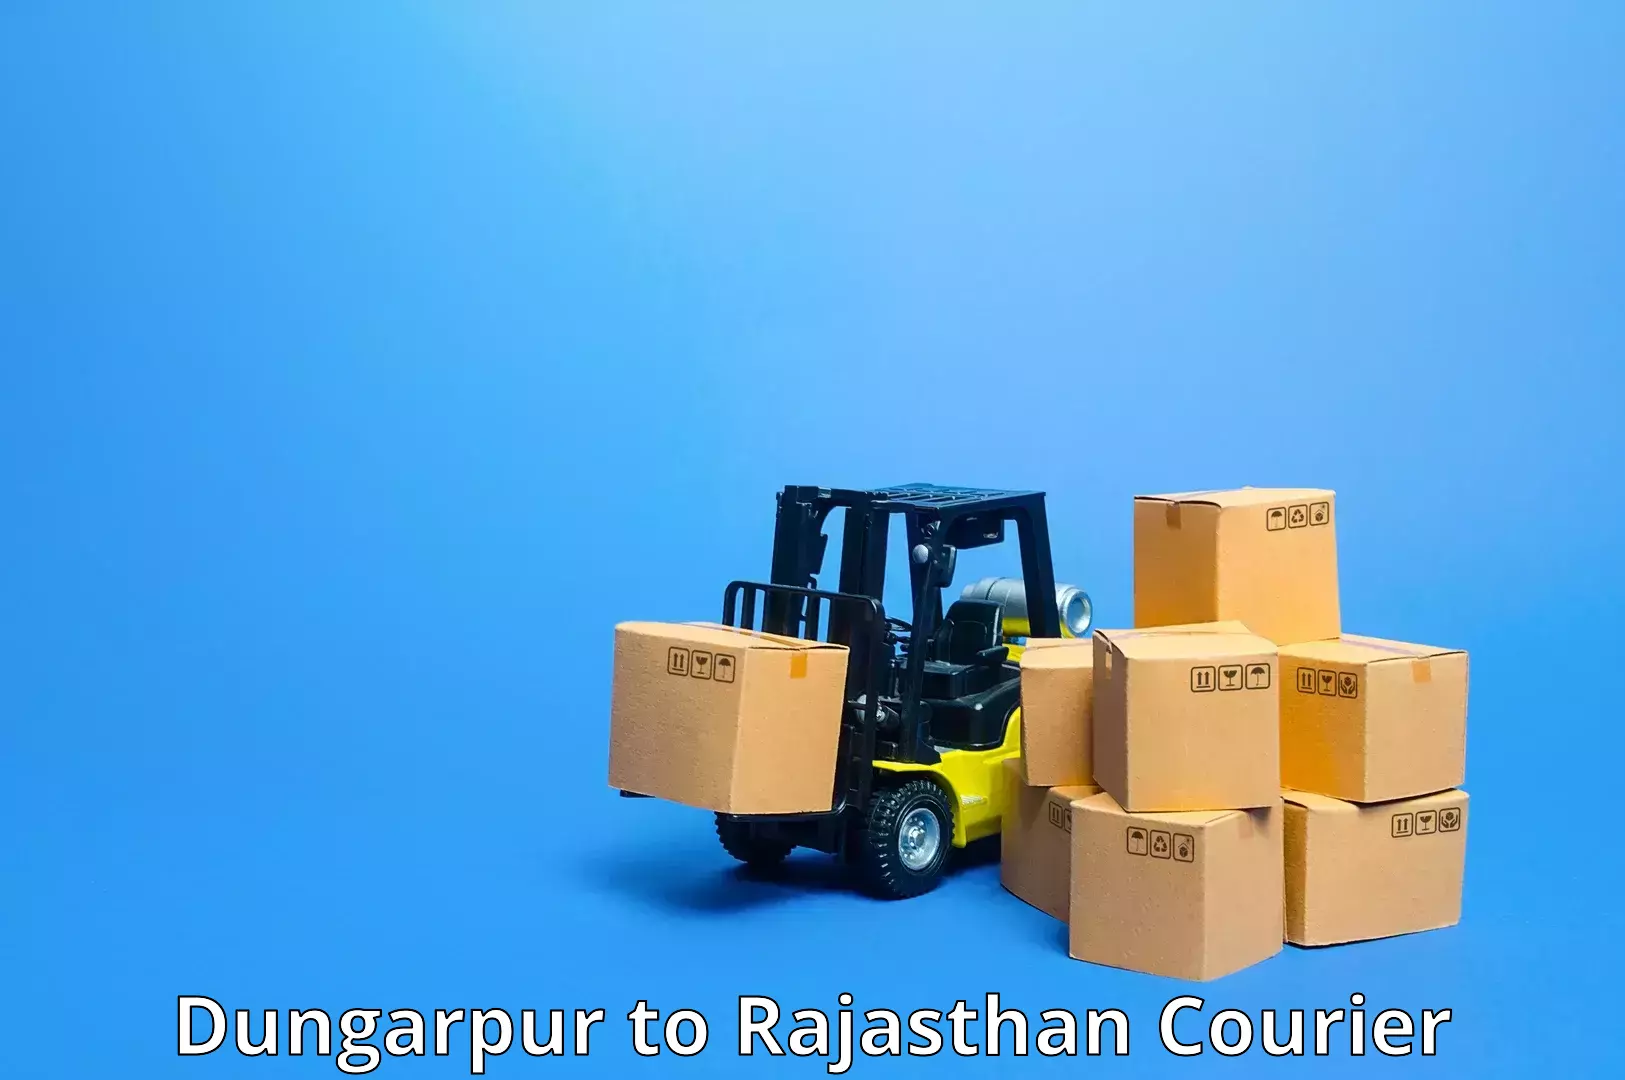 State-of-the-art courier technology Dungarpur to Merta